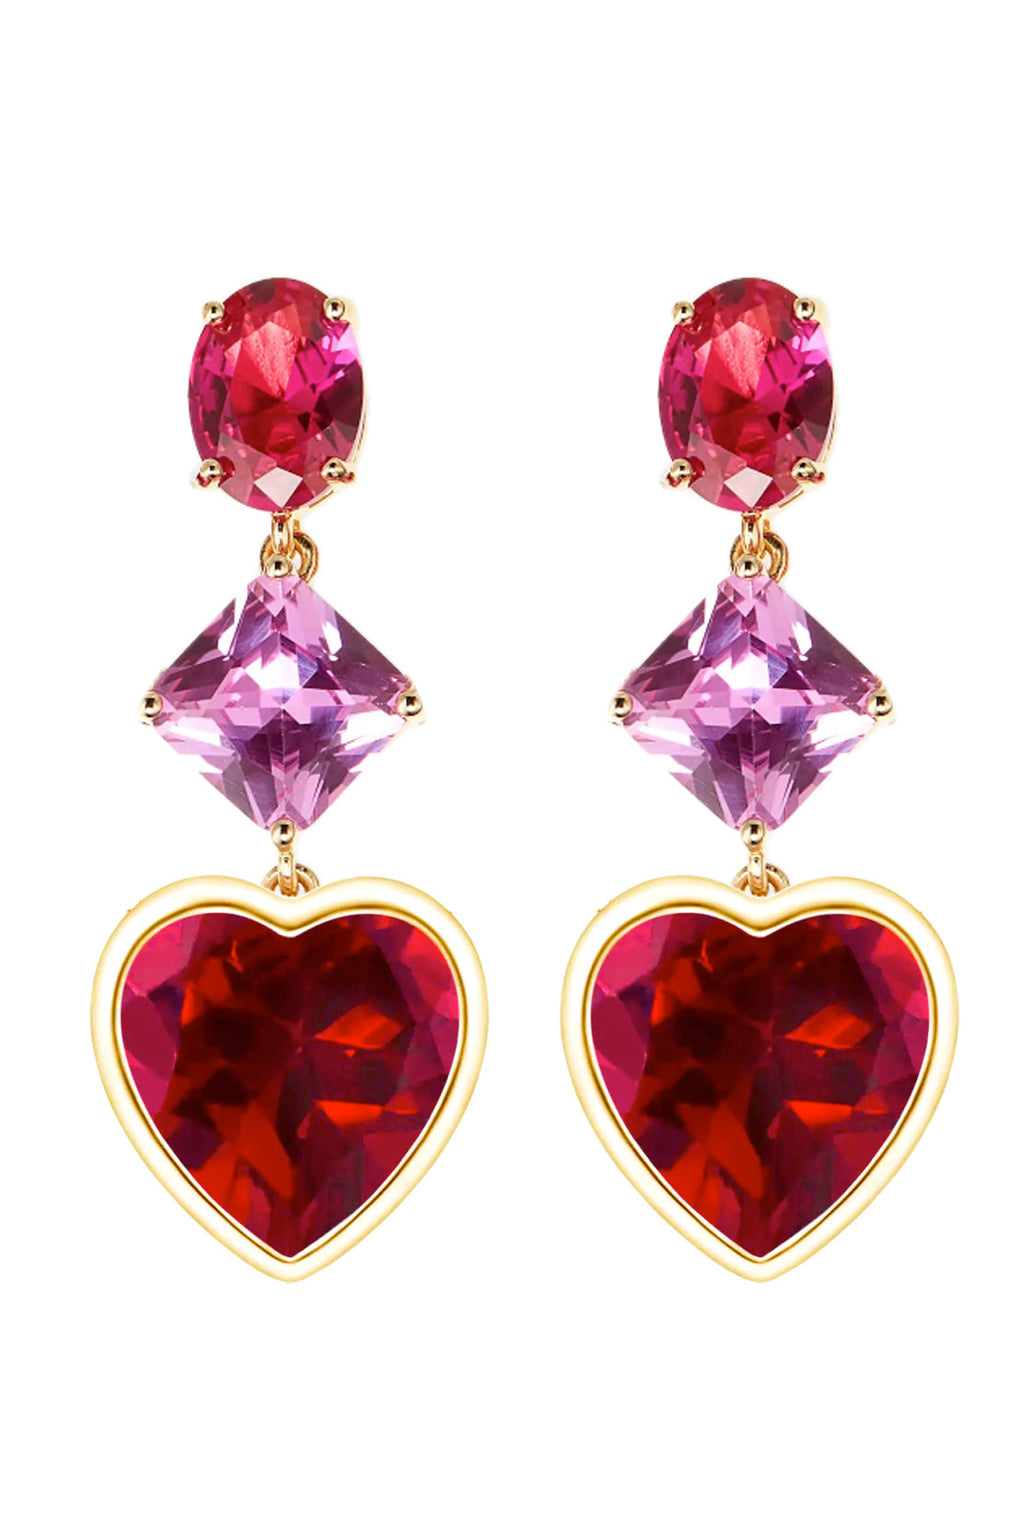 Nahid Red Heart Cubic Zirconia Drop Earrings: Passionate Elegance in Every Beat.